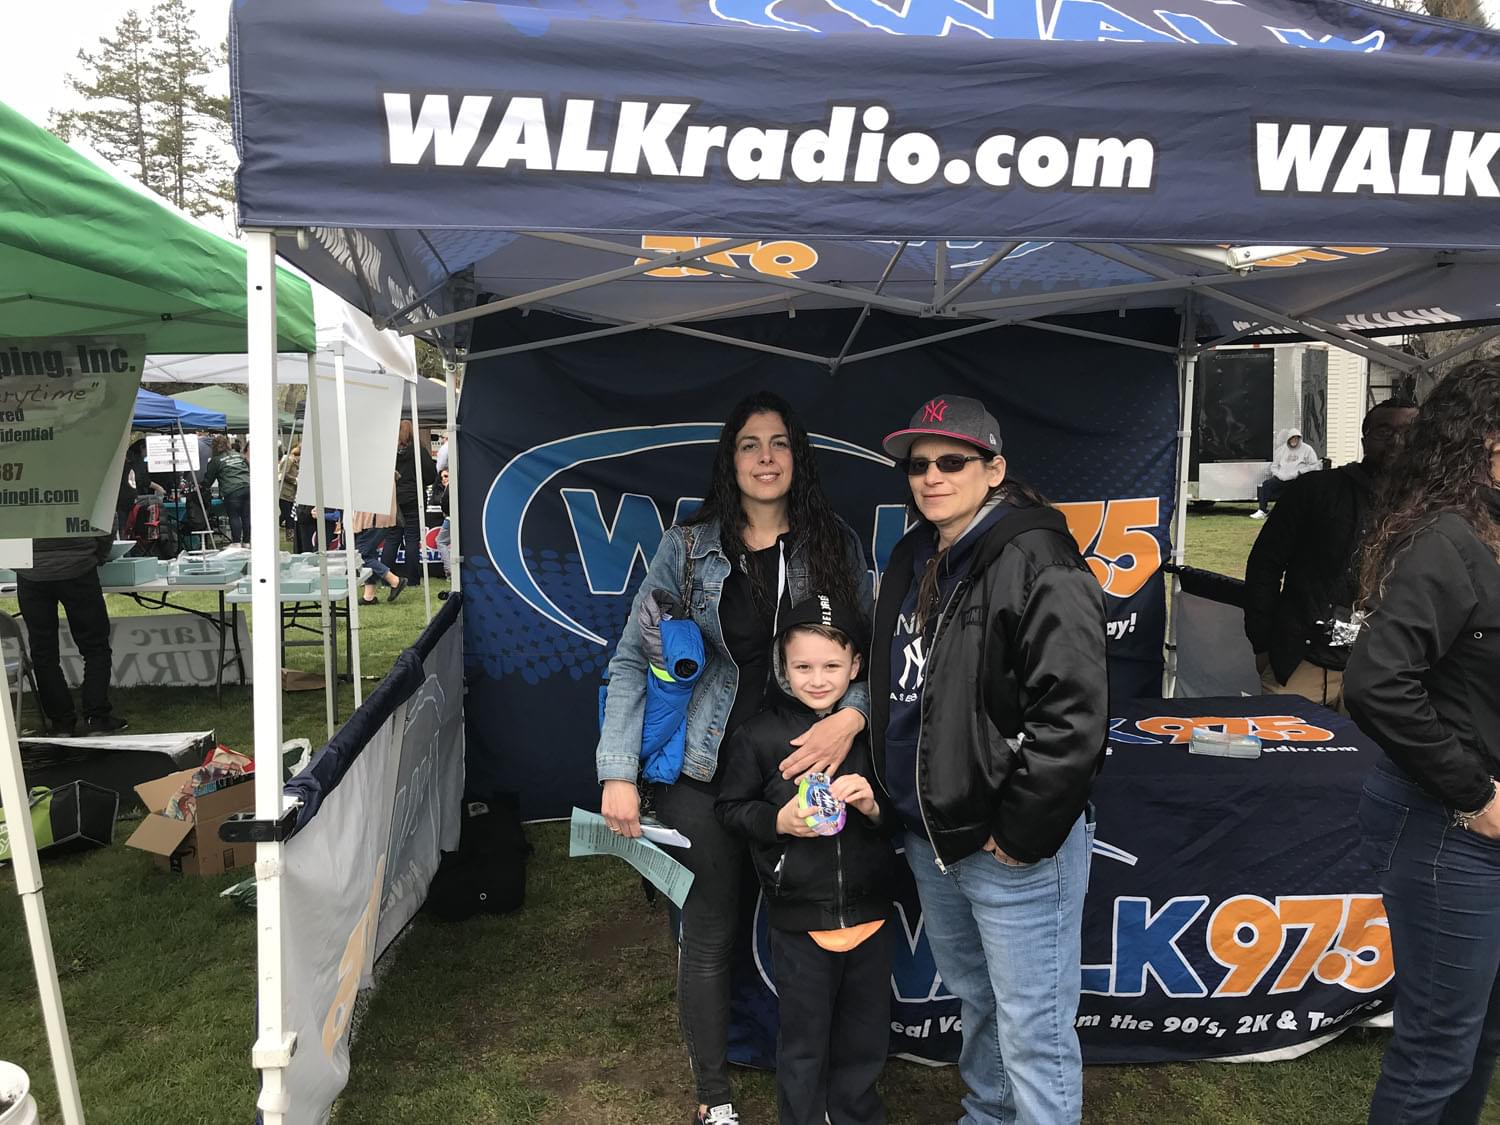 WALK 97.5 at The Sayville Spring Fest